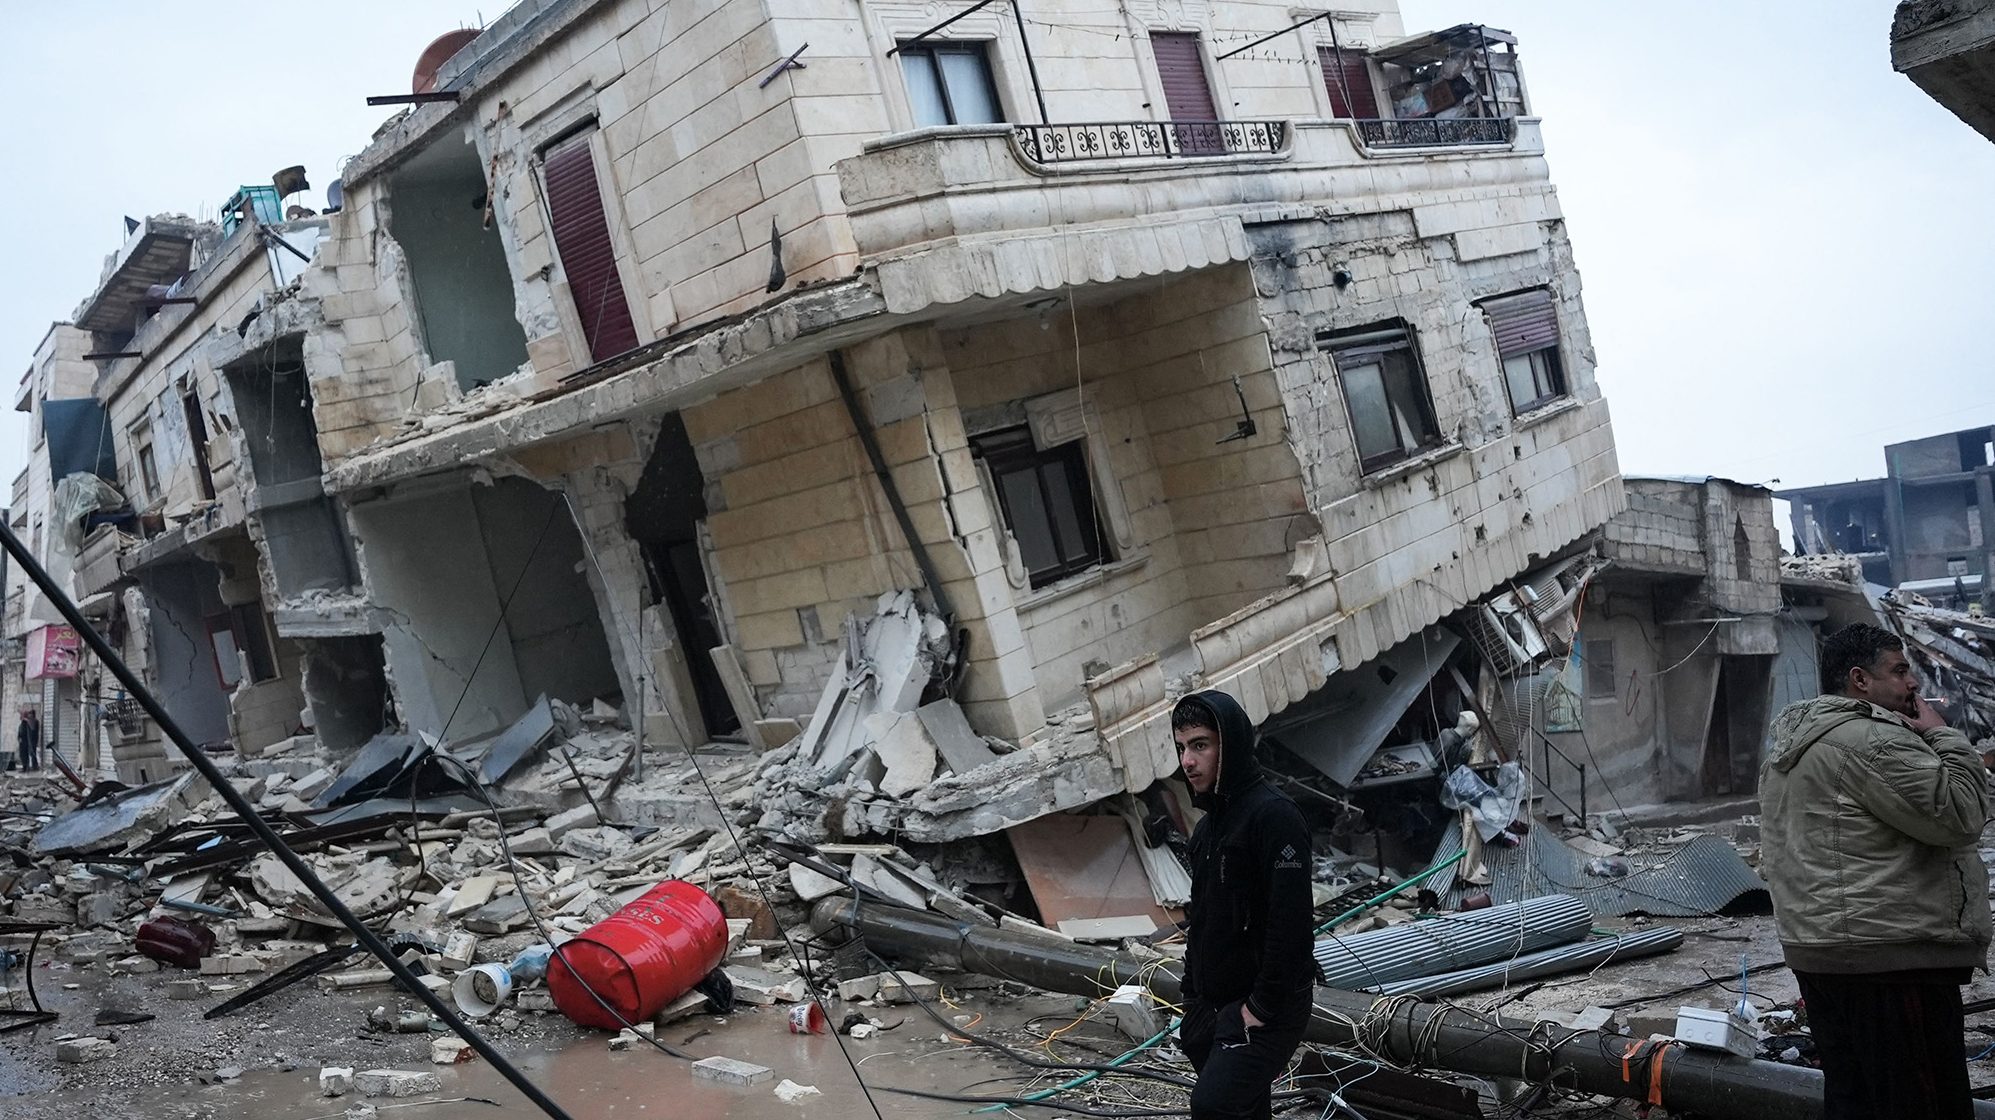 Syria Today – Earthquake Wreaks Havoc on Already Bereaved Northern Syria